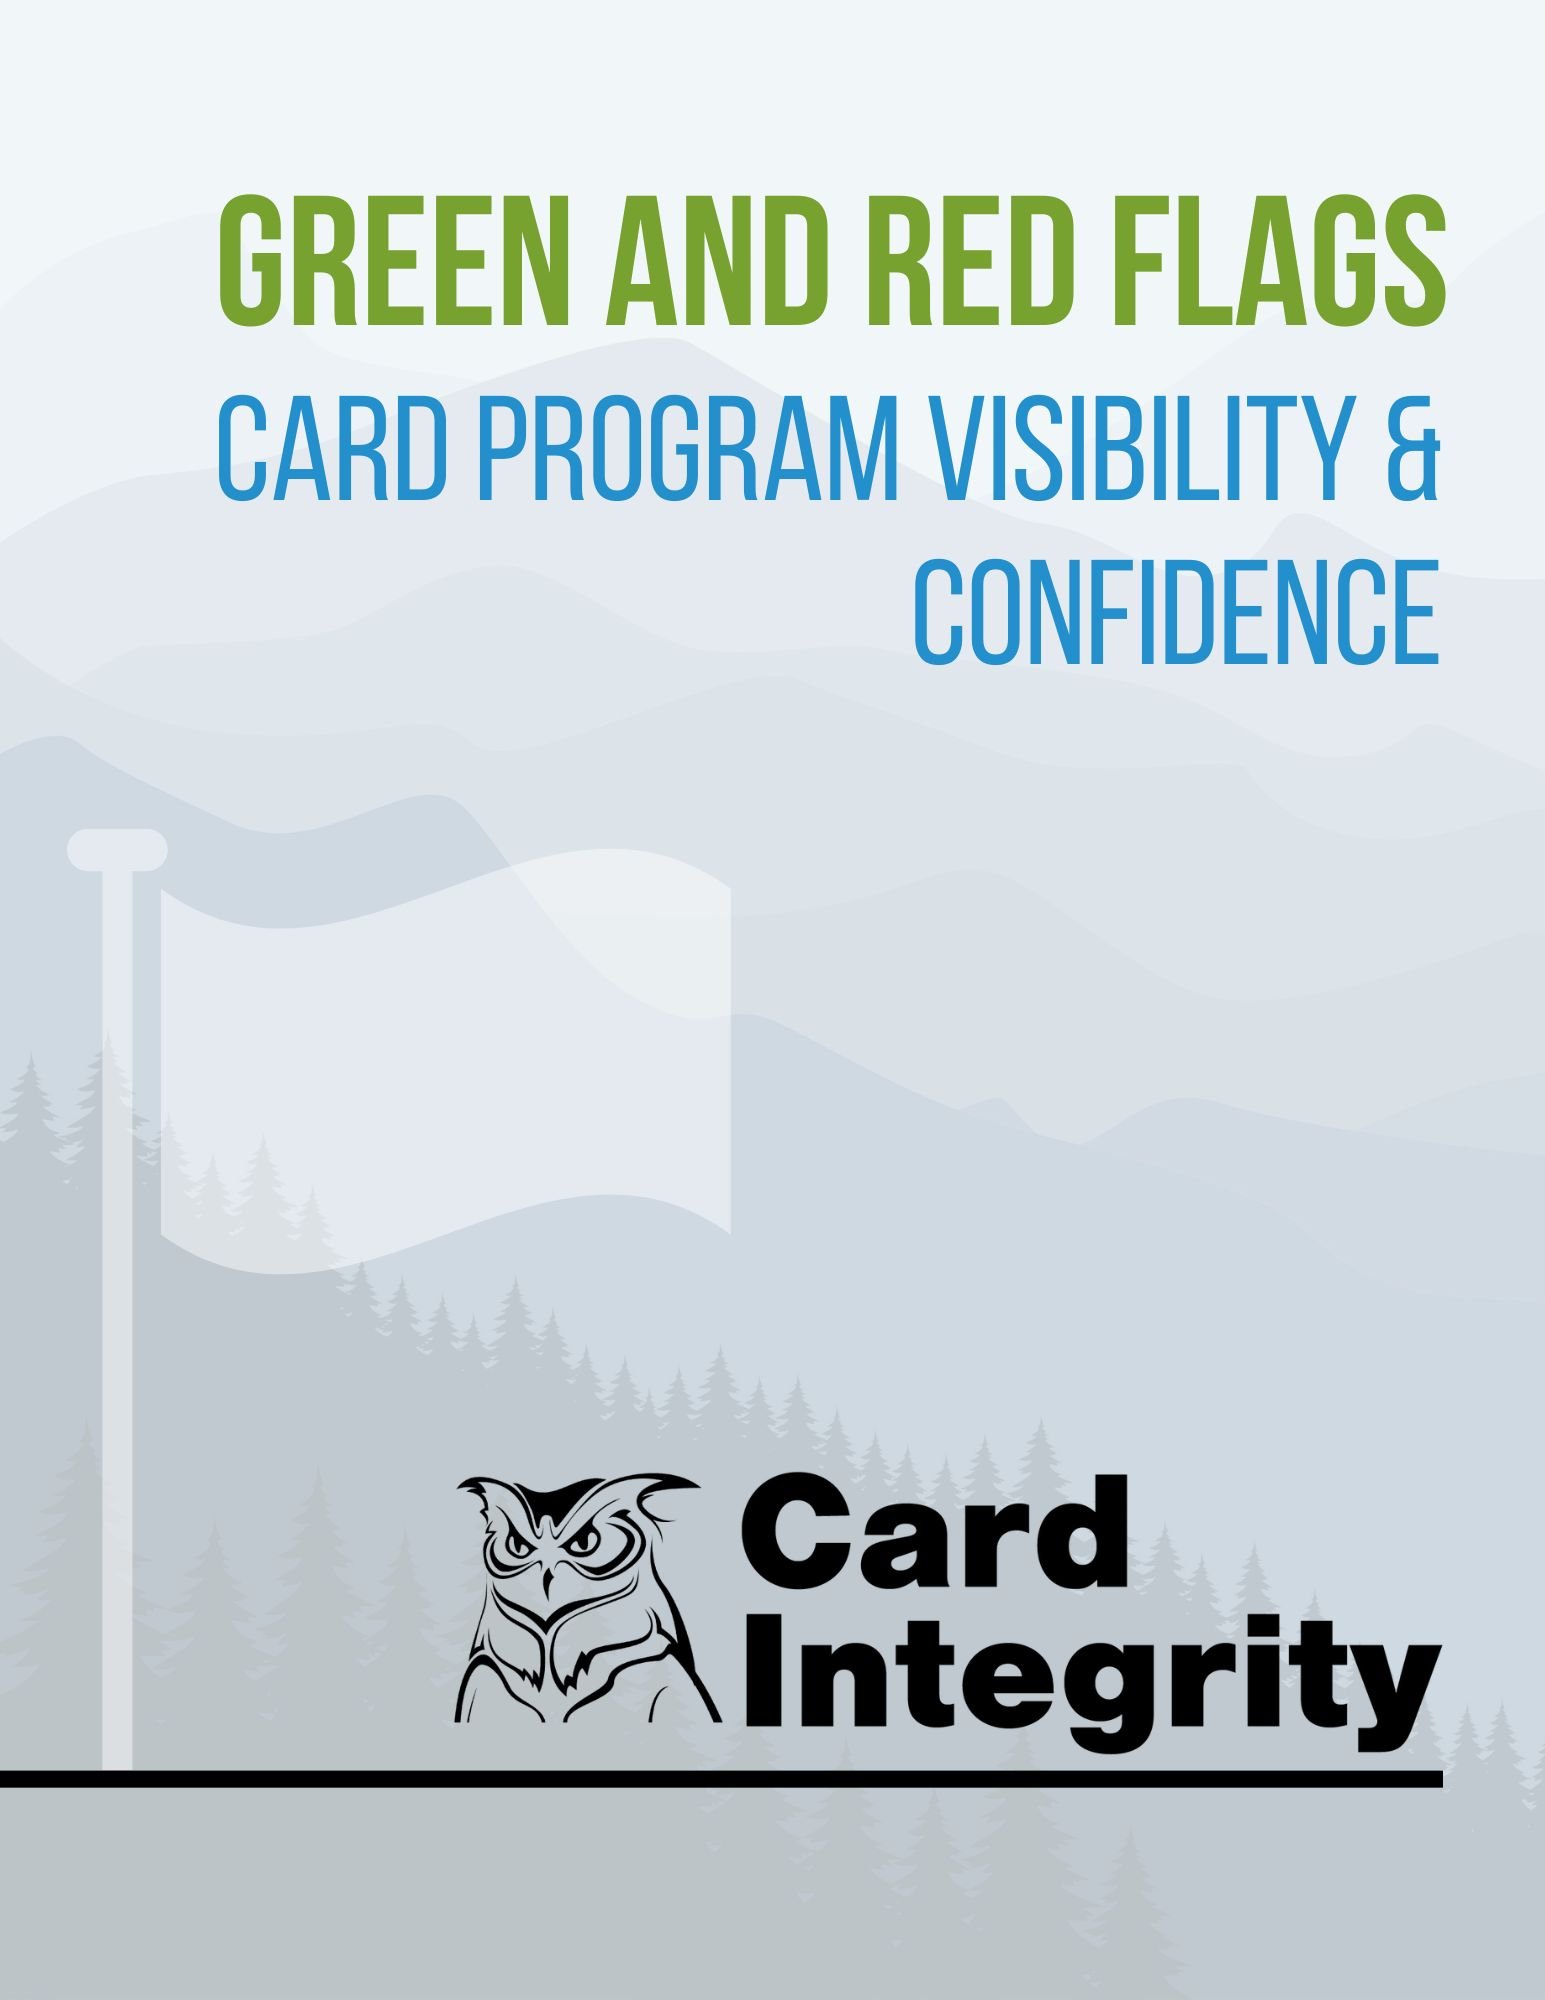 Copy of Green and red Flags Card Program Visibility & Confidence